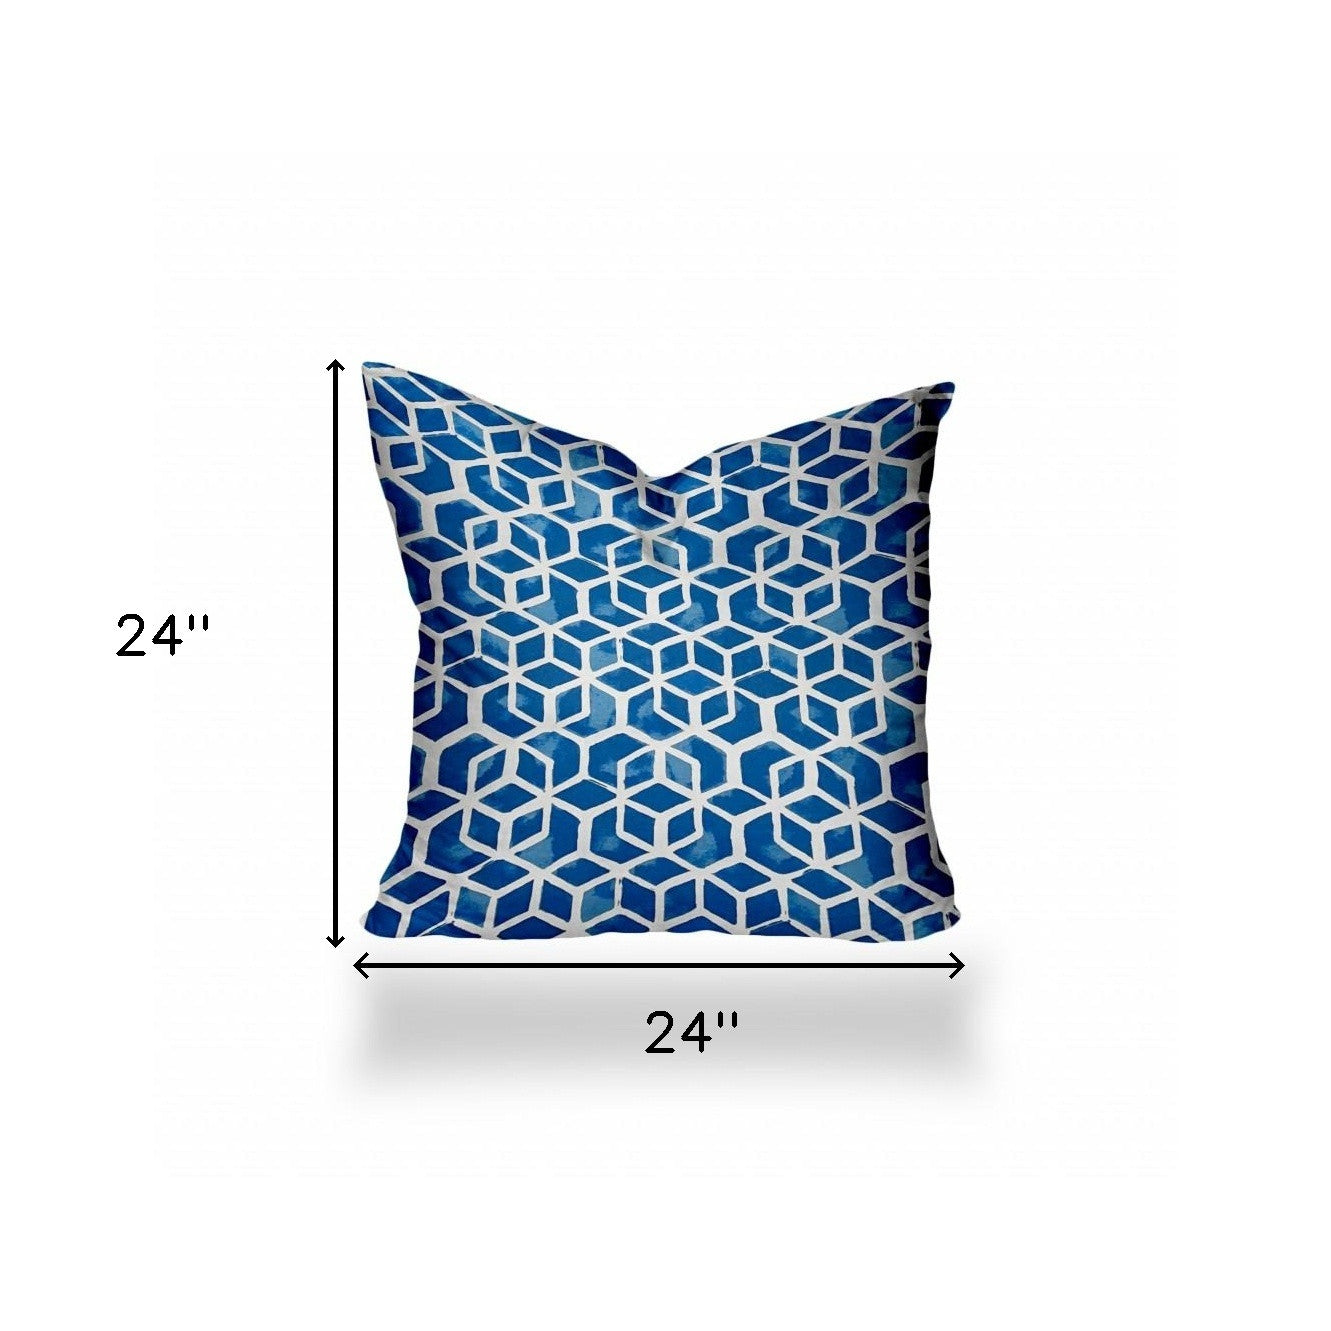 24" X 24" Blue And White Blown Seam Geometric Throw Indoor Outdoor Pillow